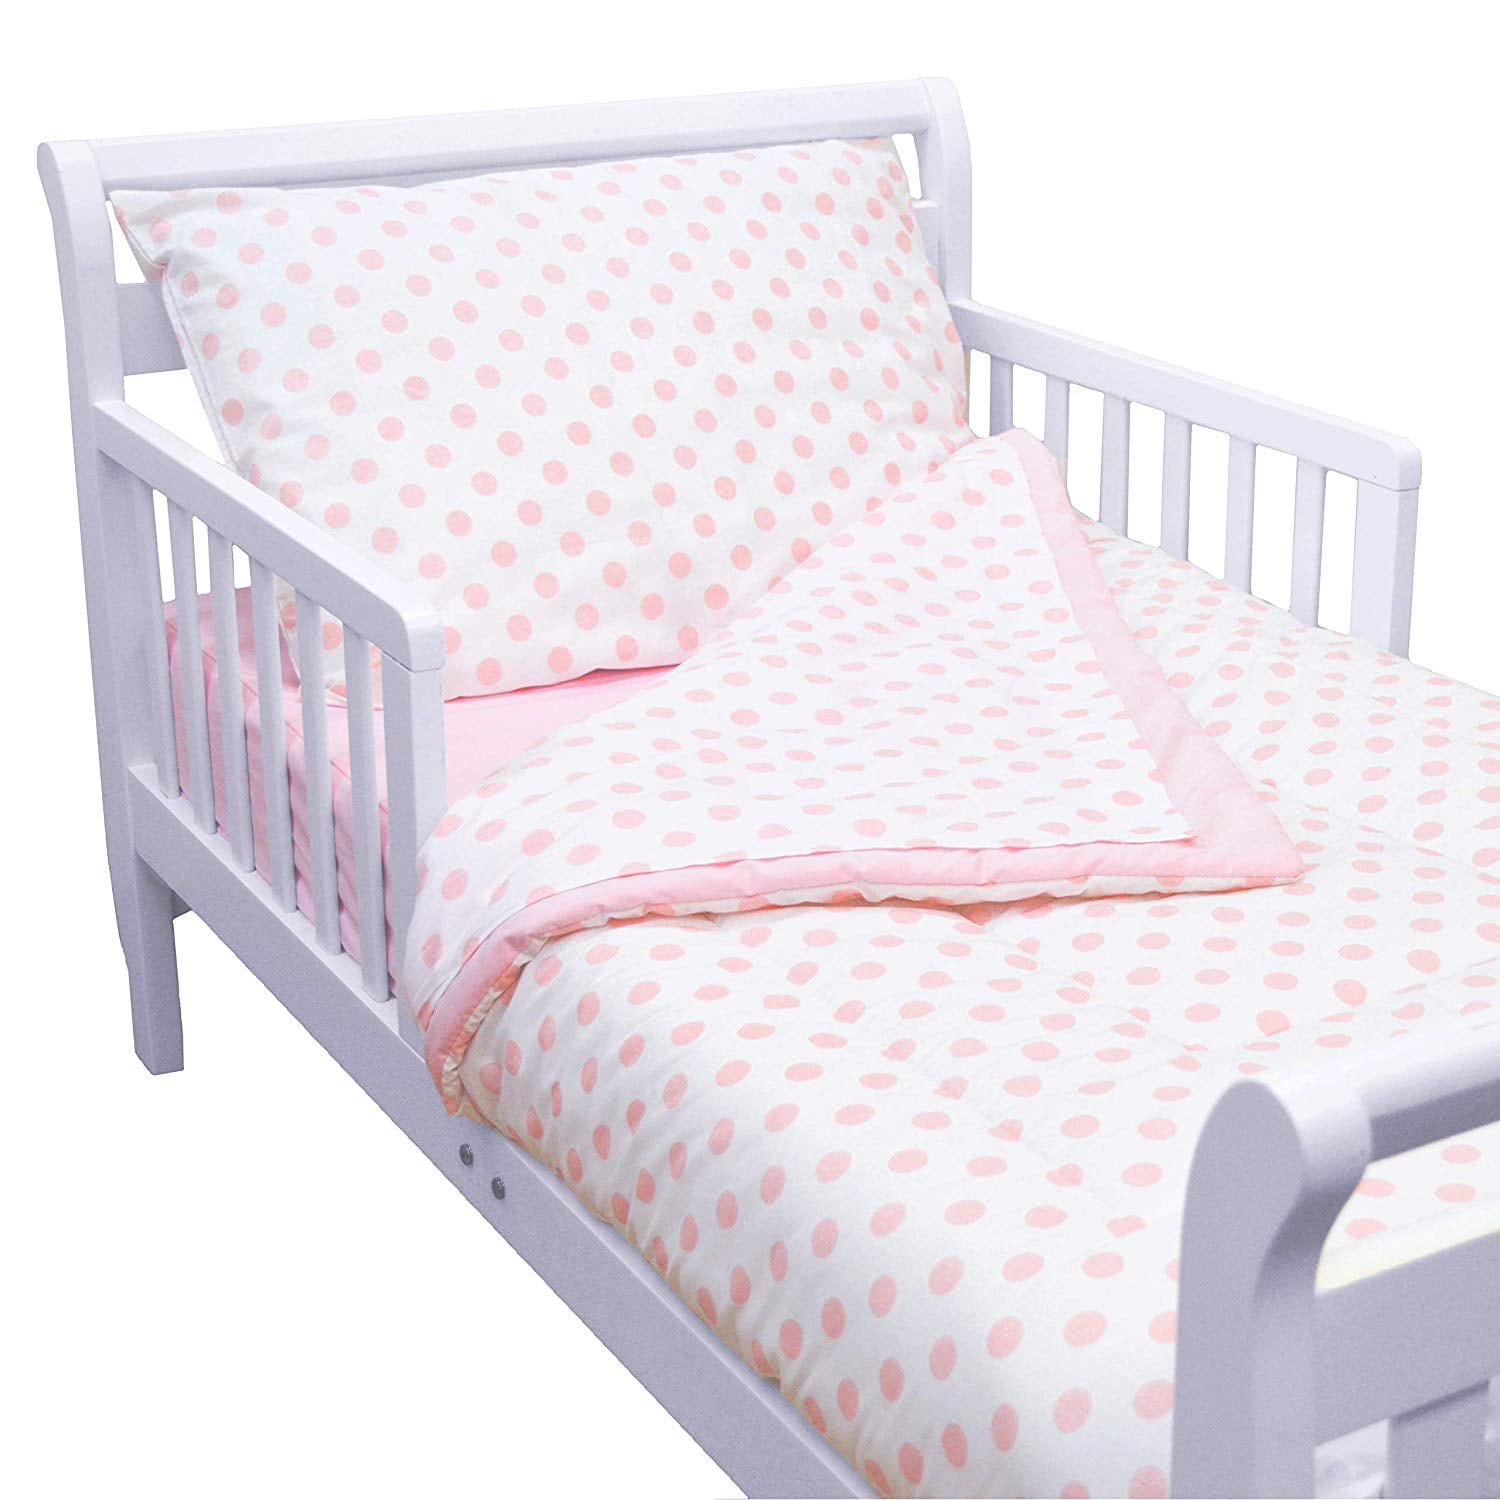 One Size Bedding Set Mint & Grey Polka Dot Cloud fit cot / bed girl or boy 